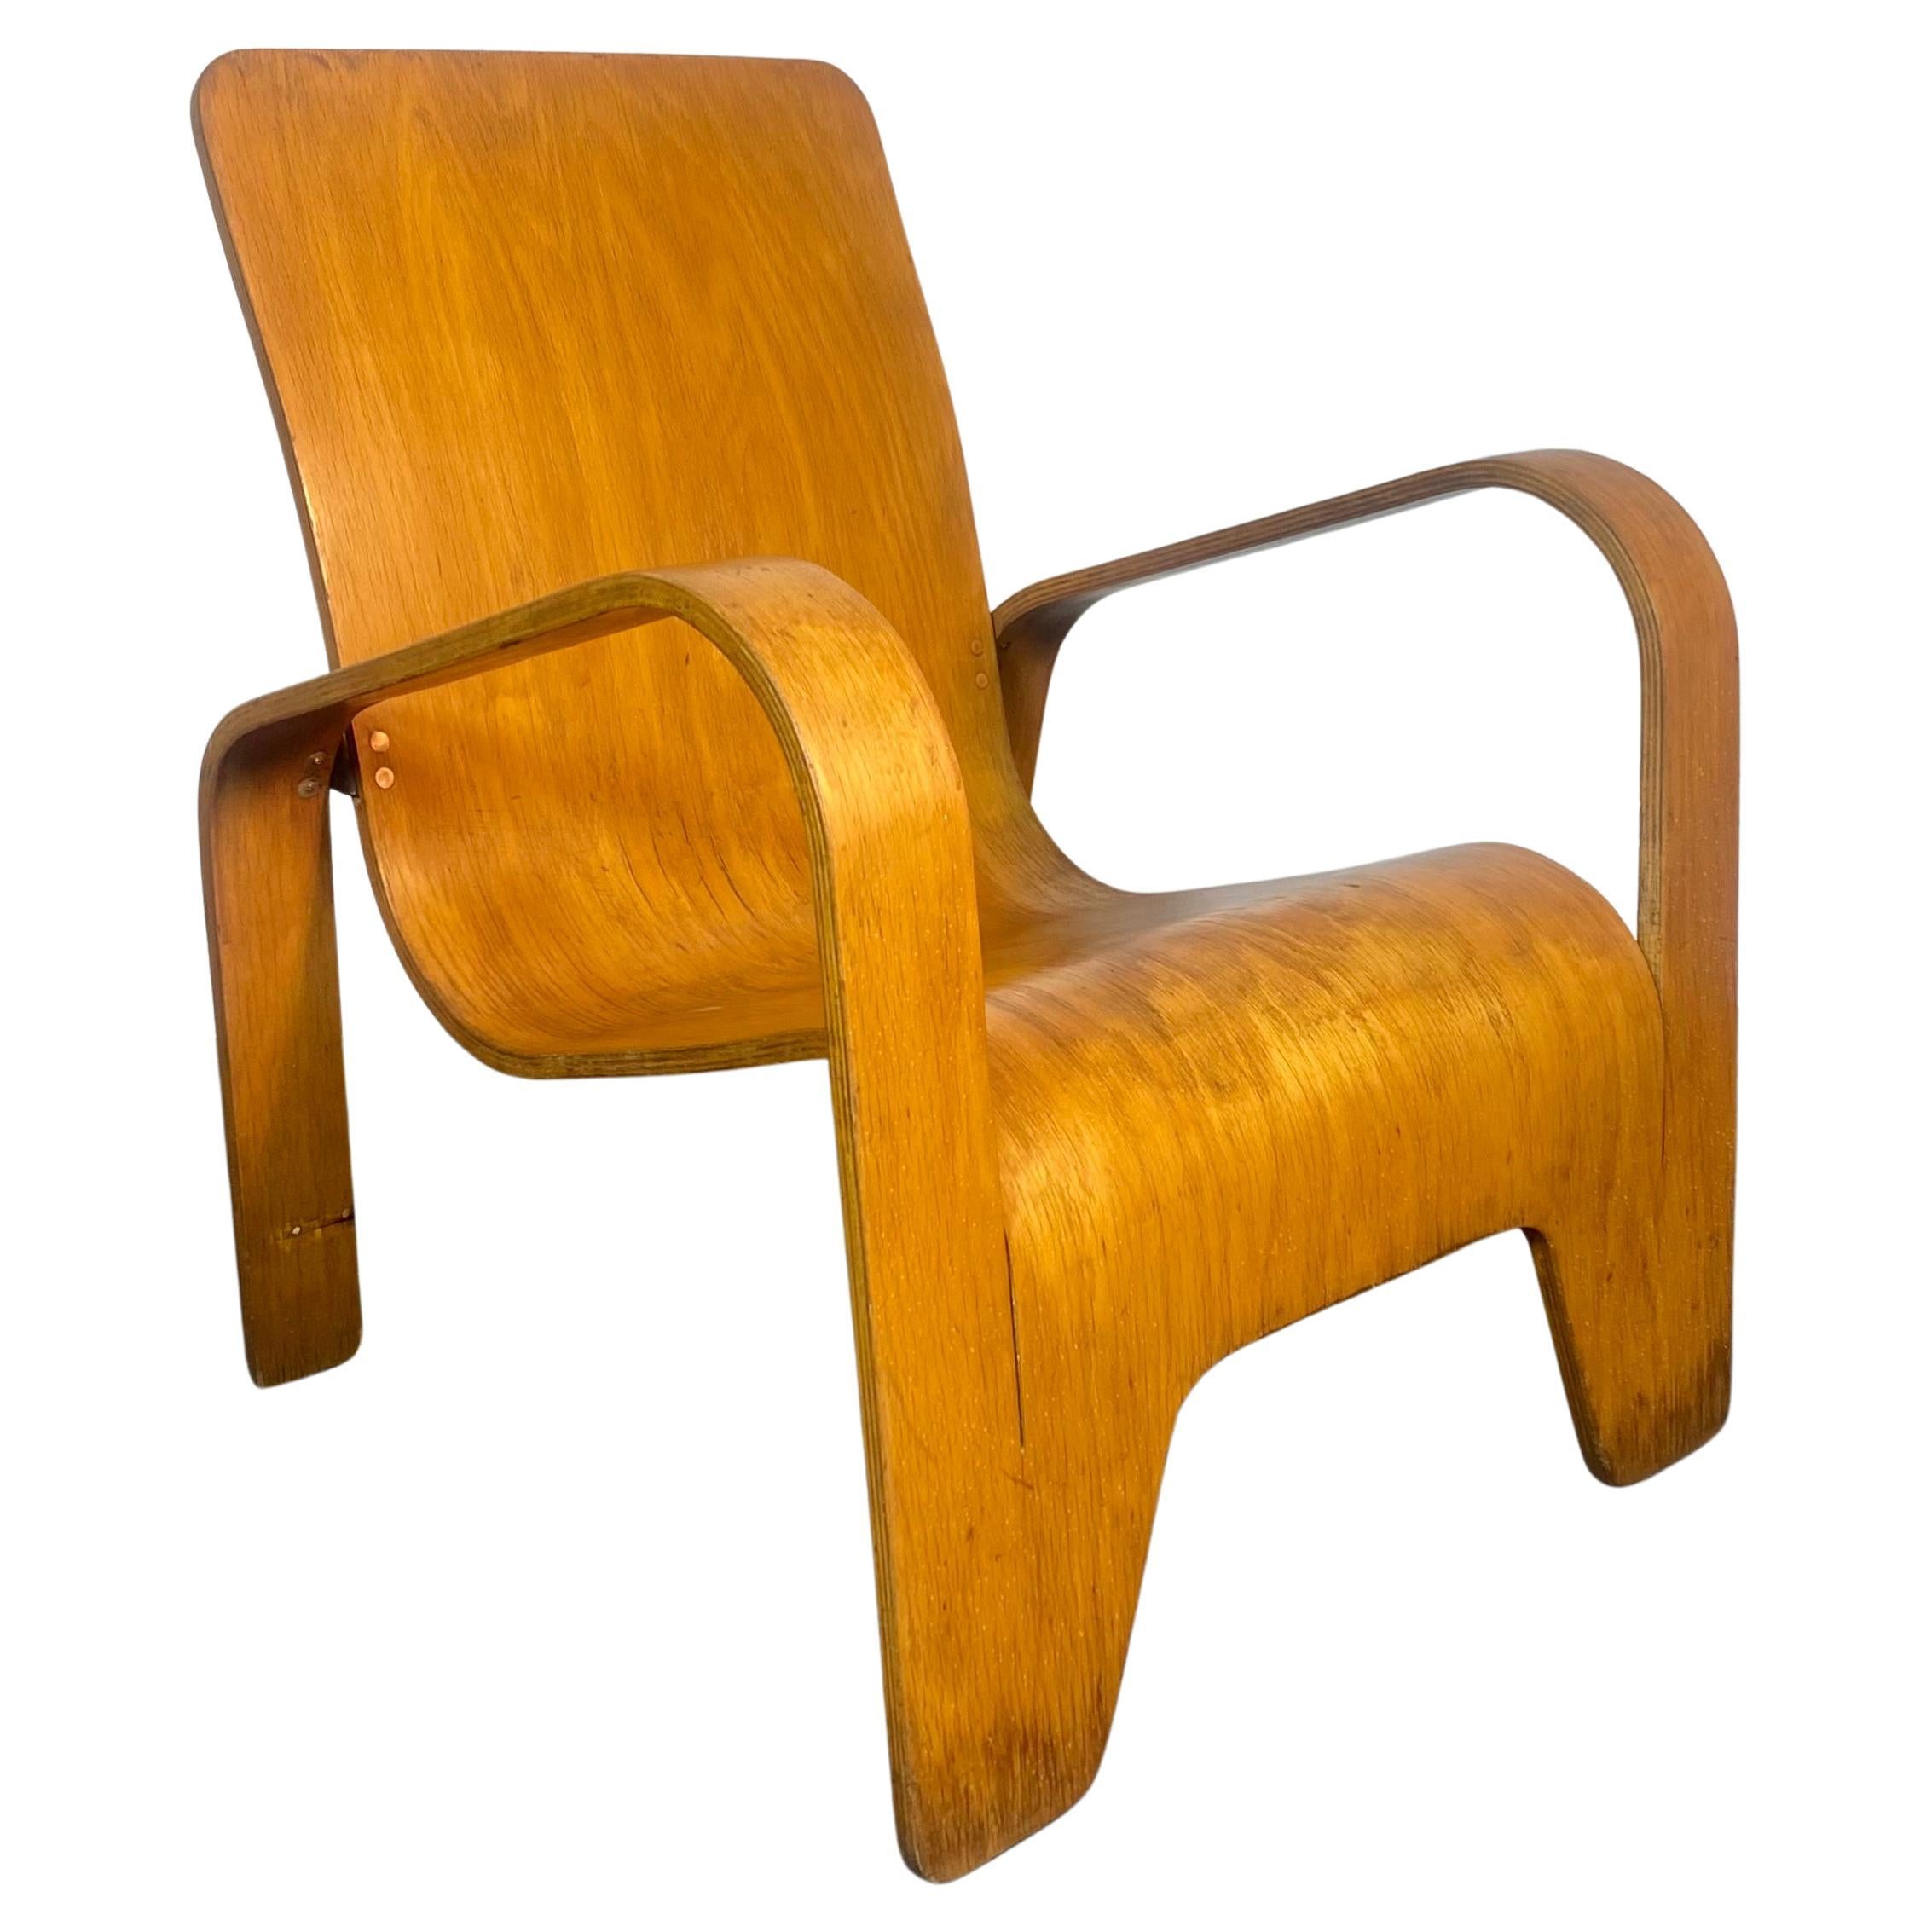 LaWo1 Molded Plywood Lounge Chair by Han Pieck for Lawo Ommen/ Netherlands 1945